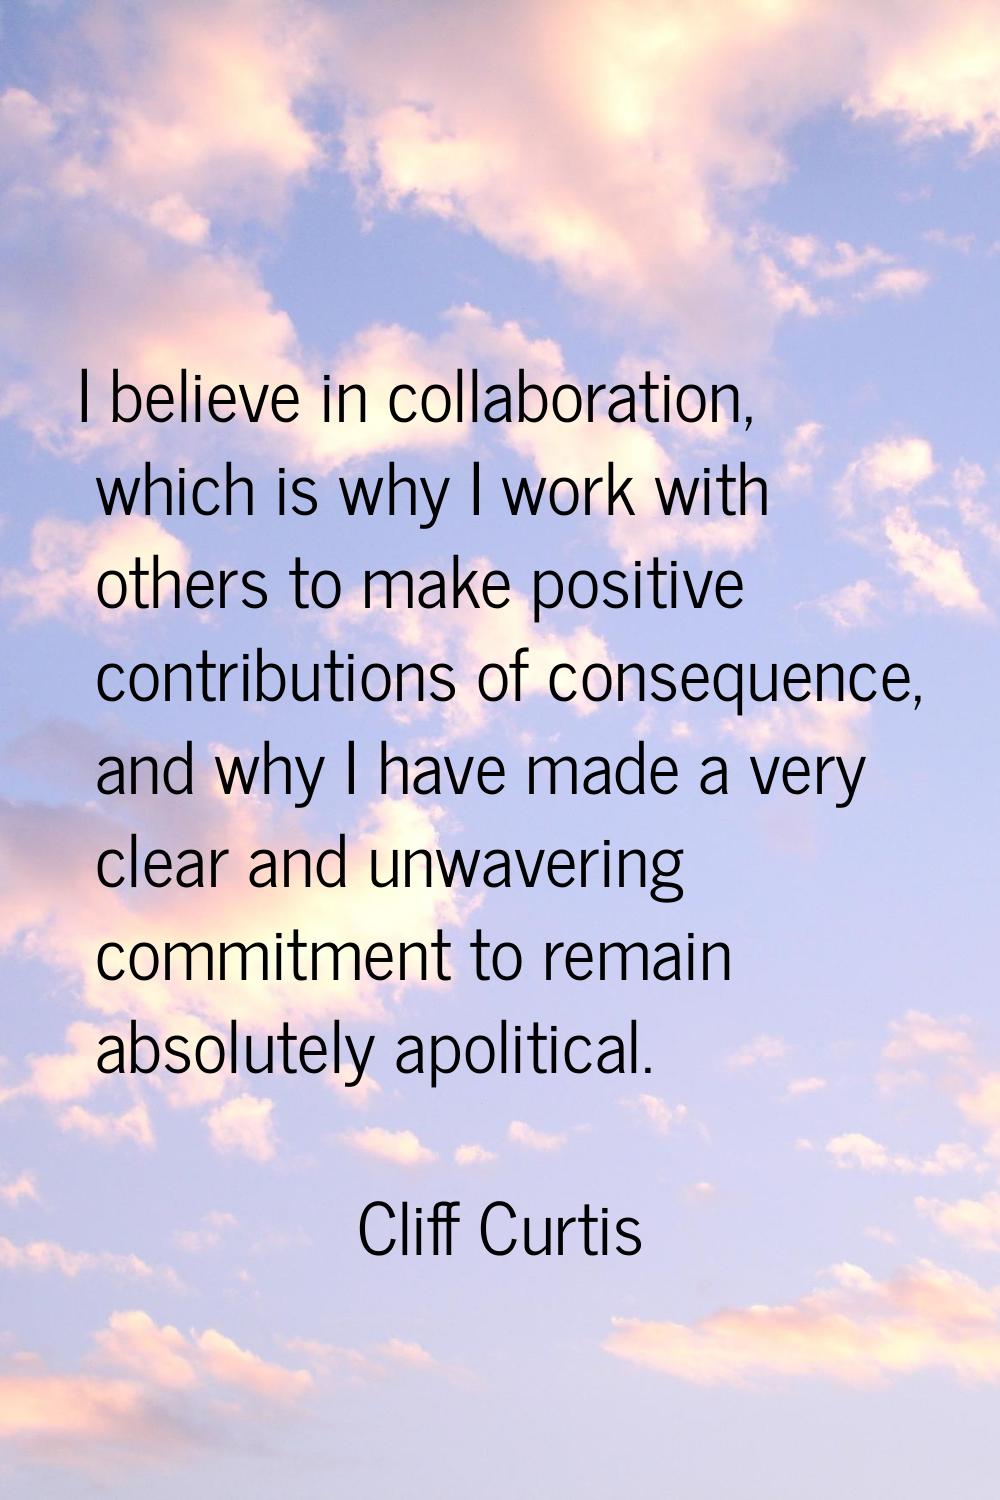 I believe in collaboration, which is why I work with others to make positive contributions of conse